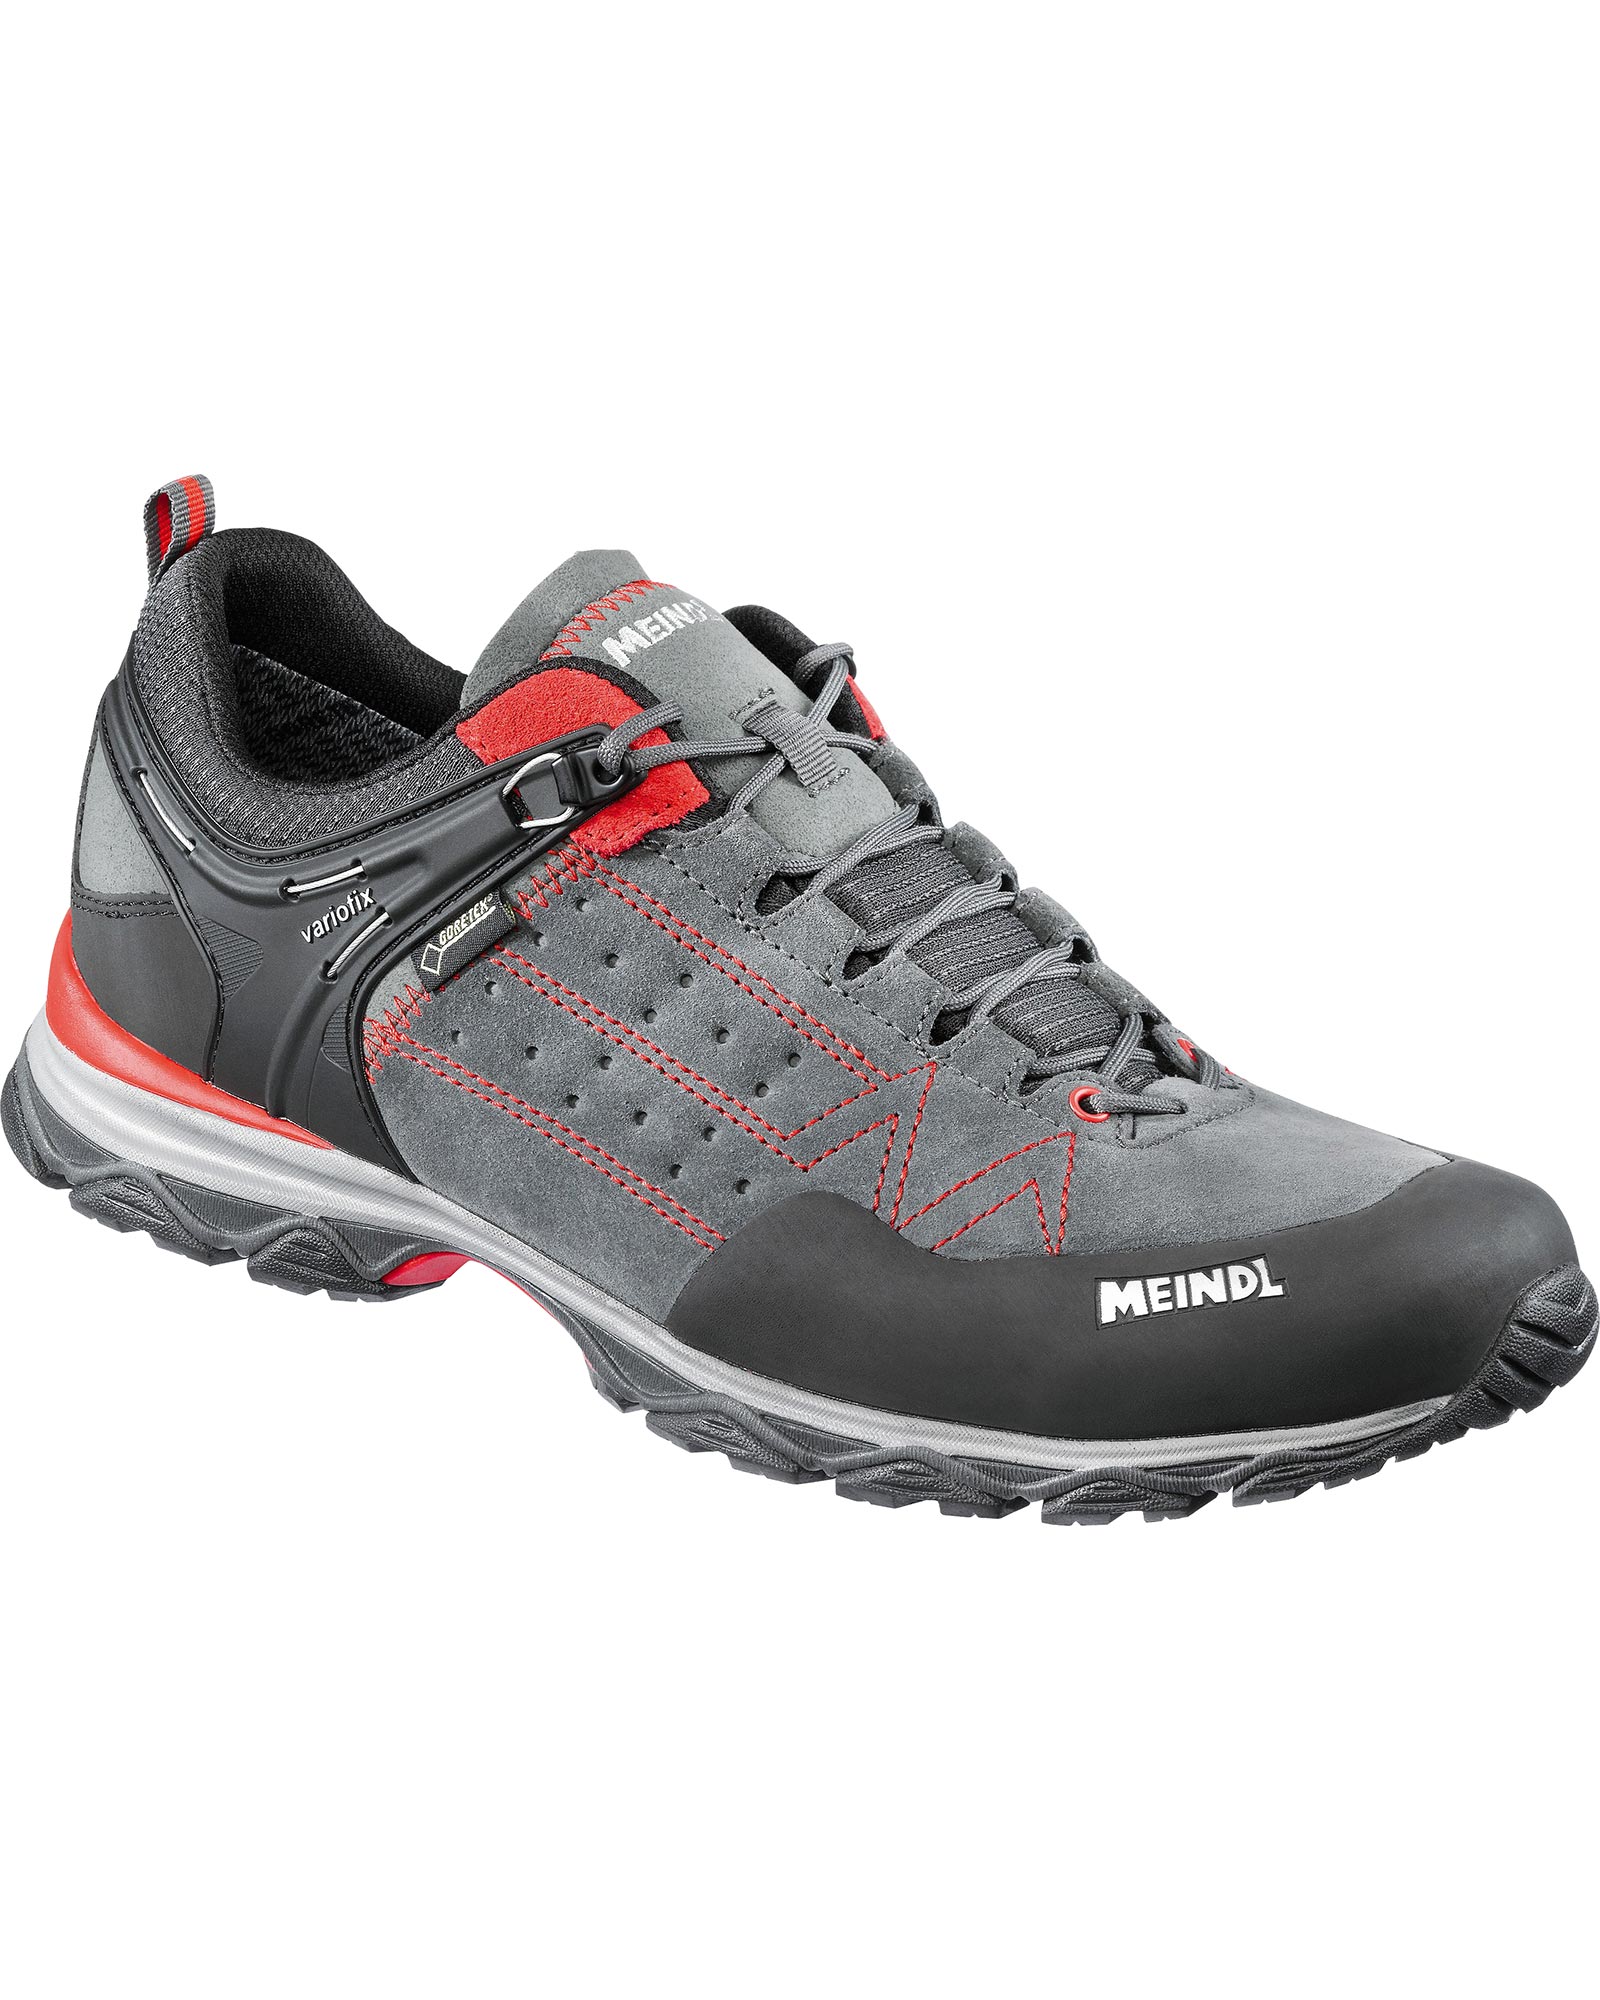 Meindl Ontario GORE TEX Men’s Shoes - Red/Anthracite UK 10.5